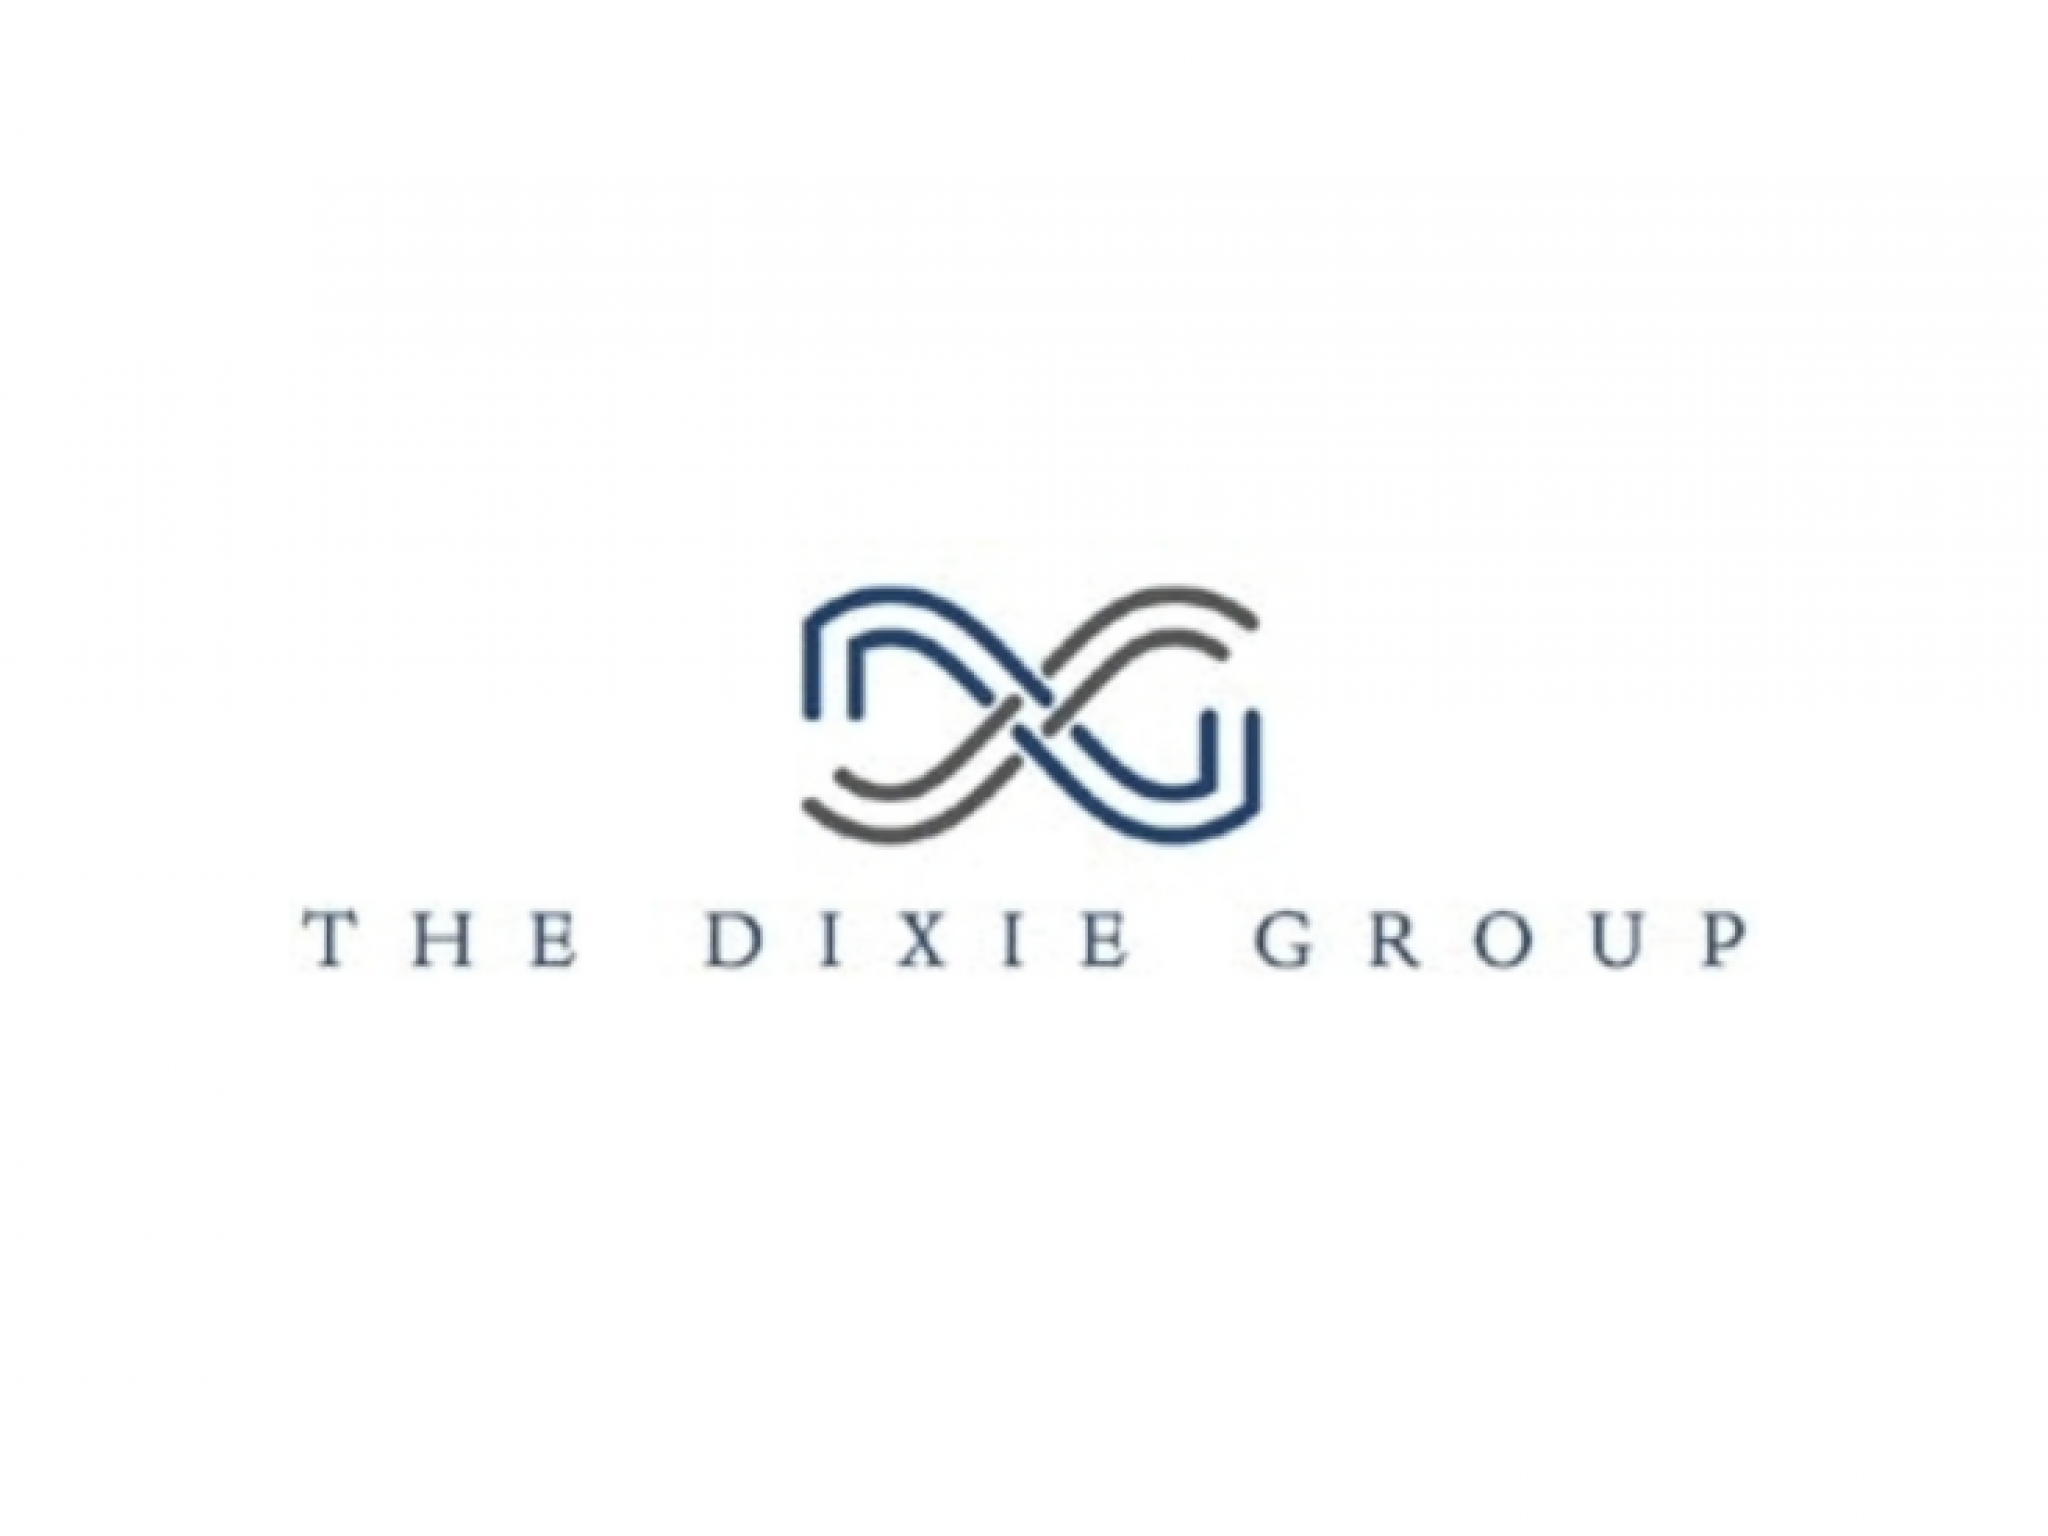  why-dixie-group-shares-are-rising-today 